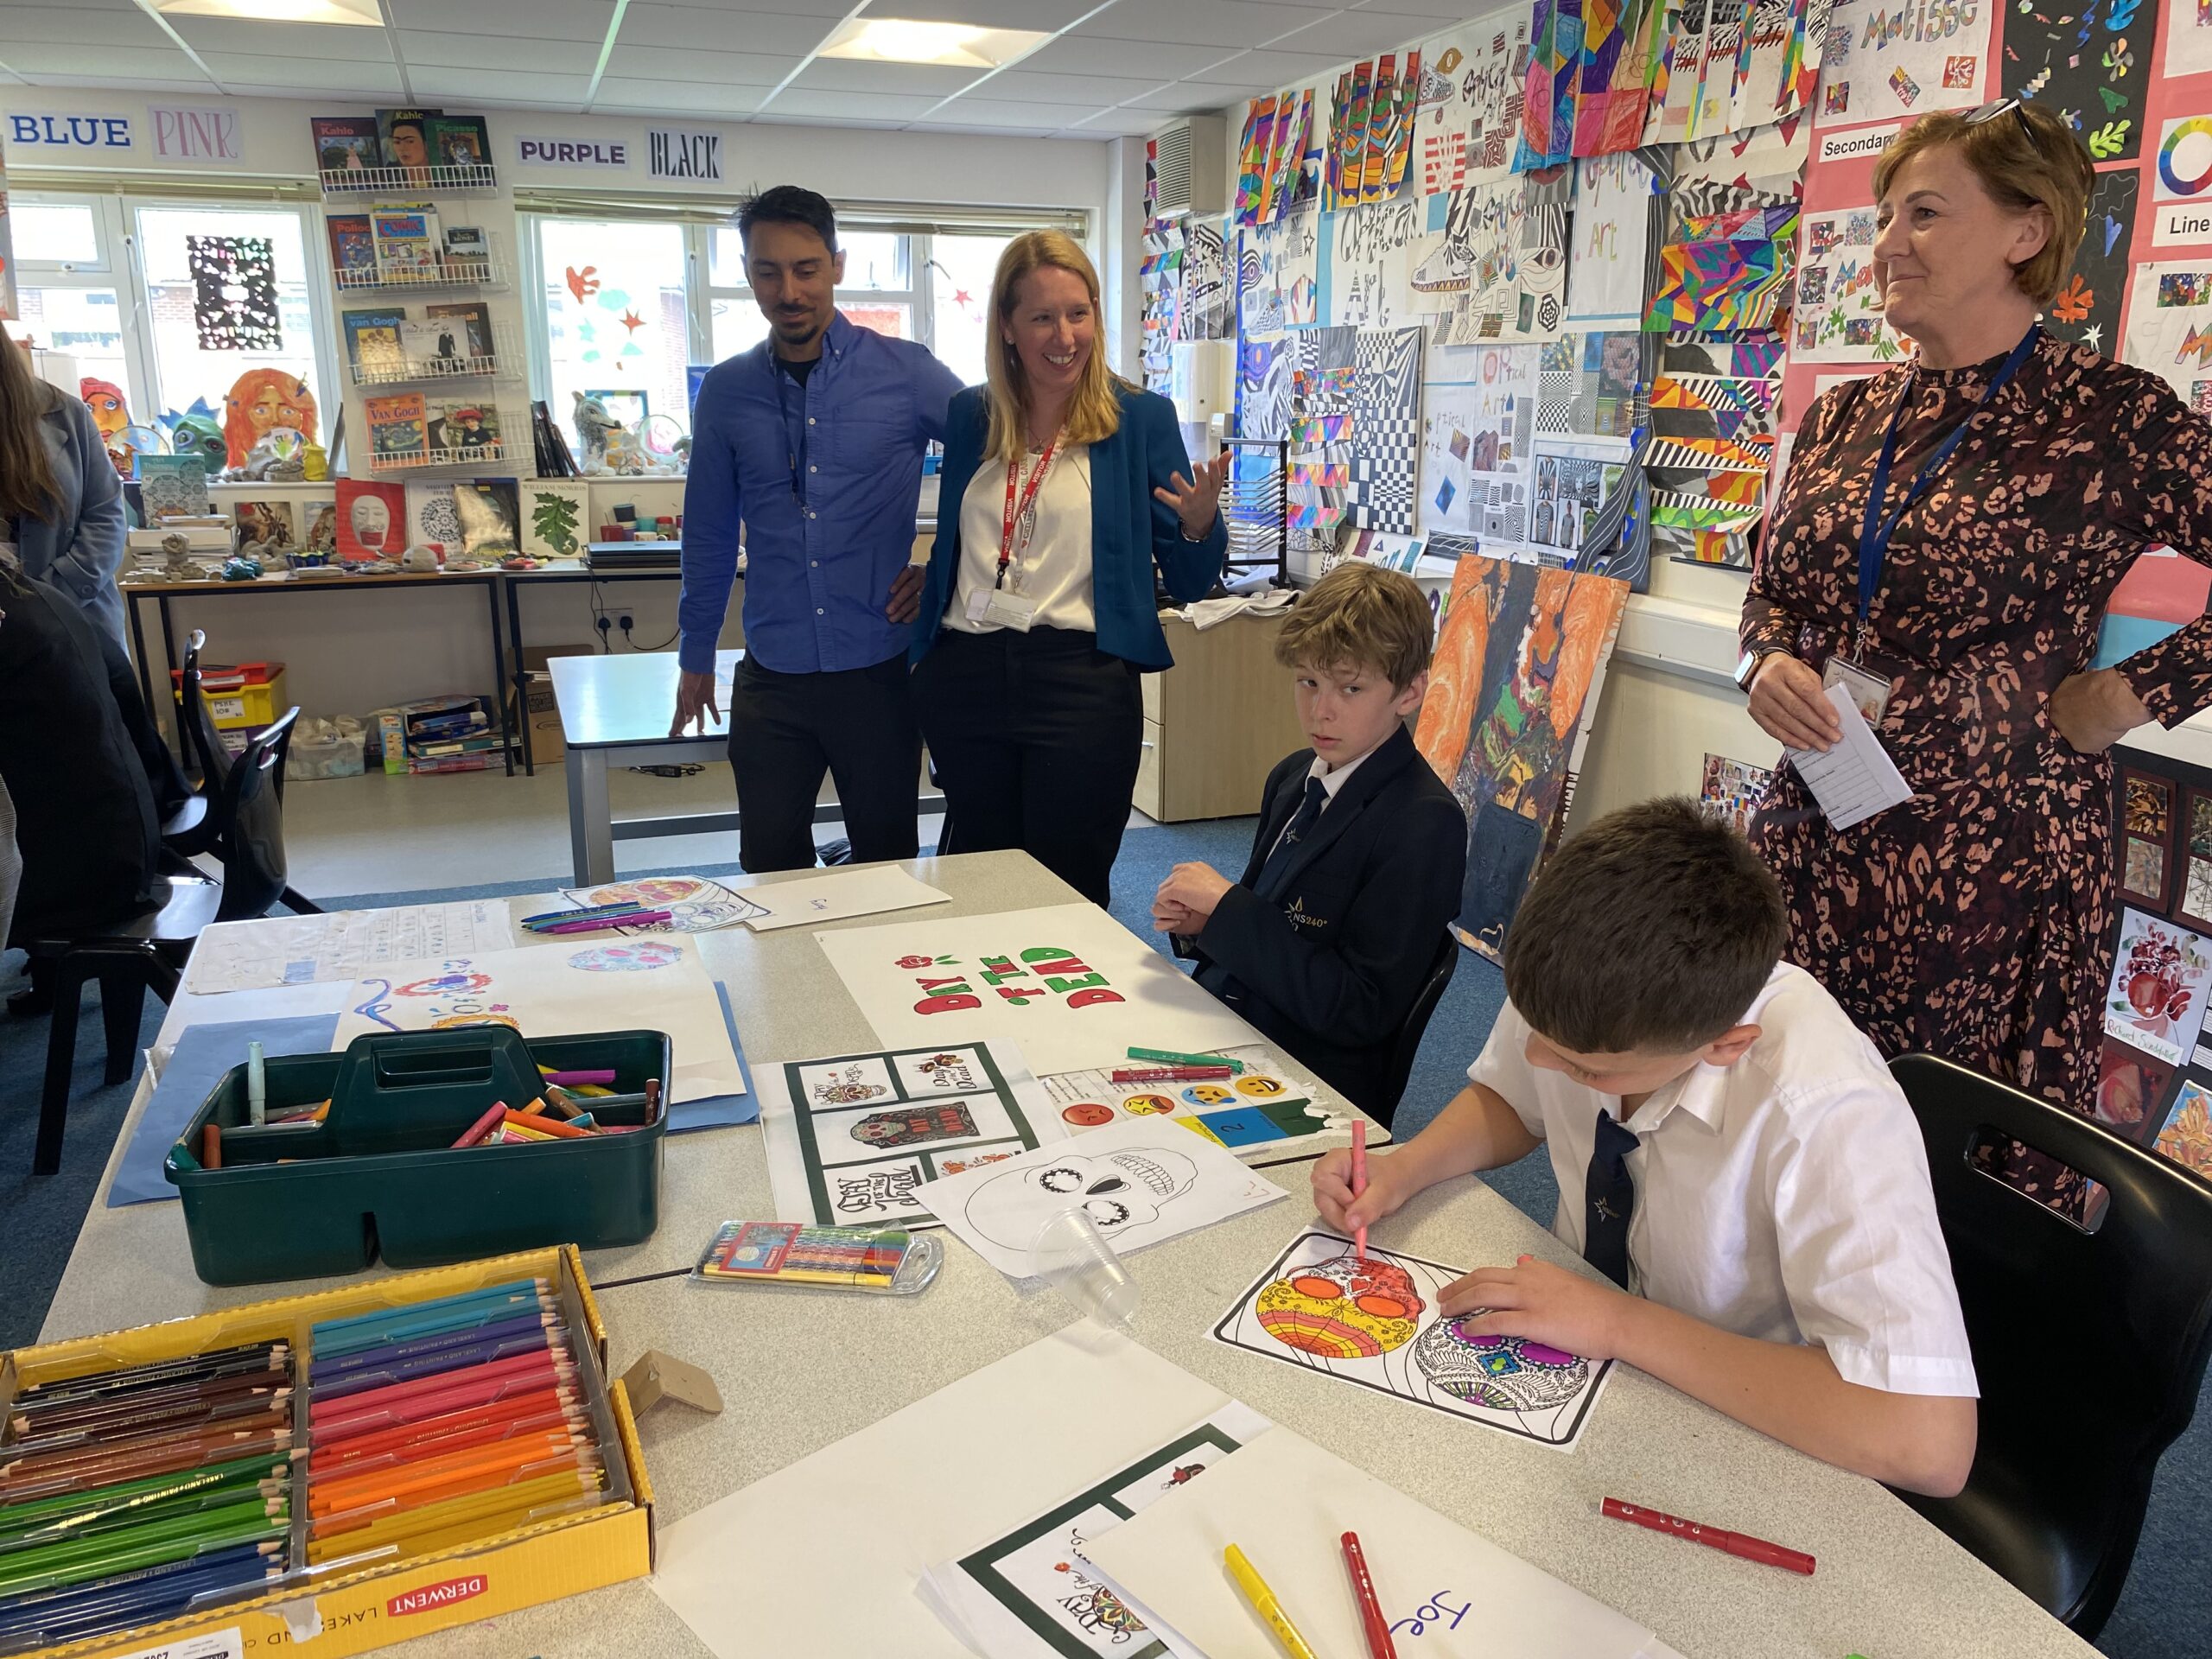 Department for Education’s Regional Director SW reflects on a brilliant visit to North Star Academy Trust in Bristol